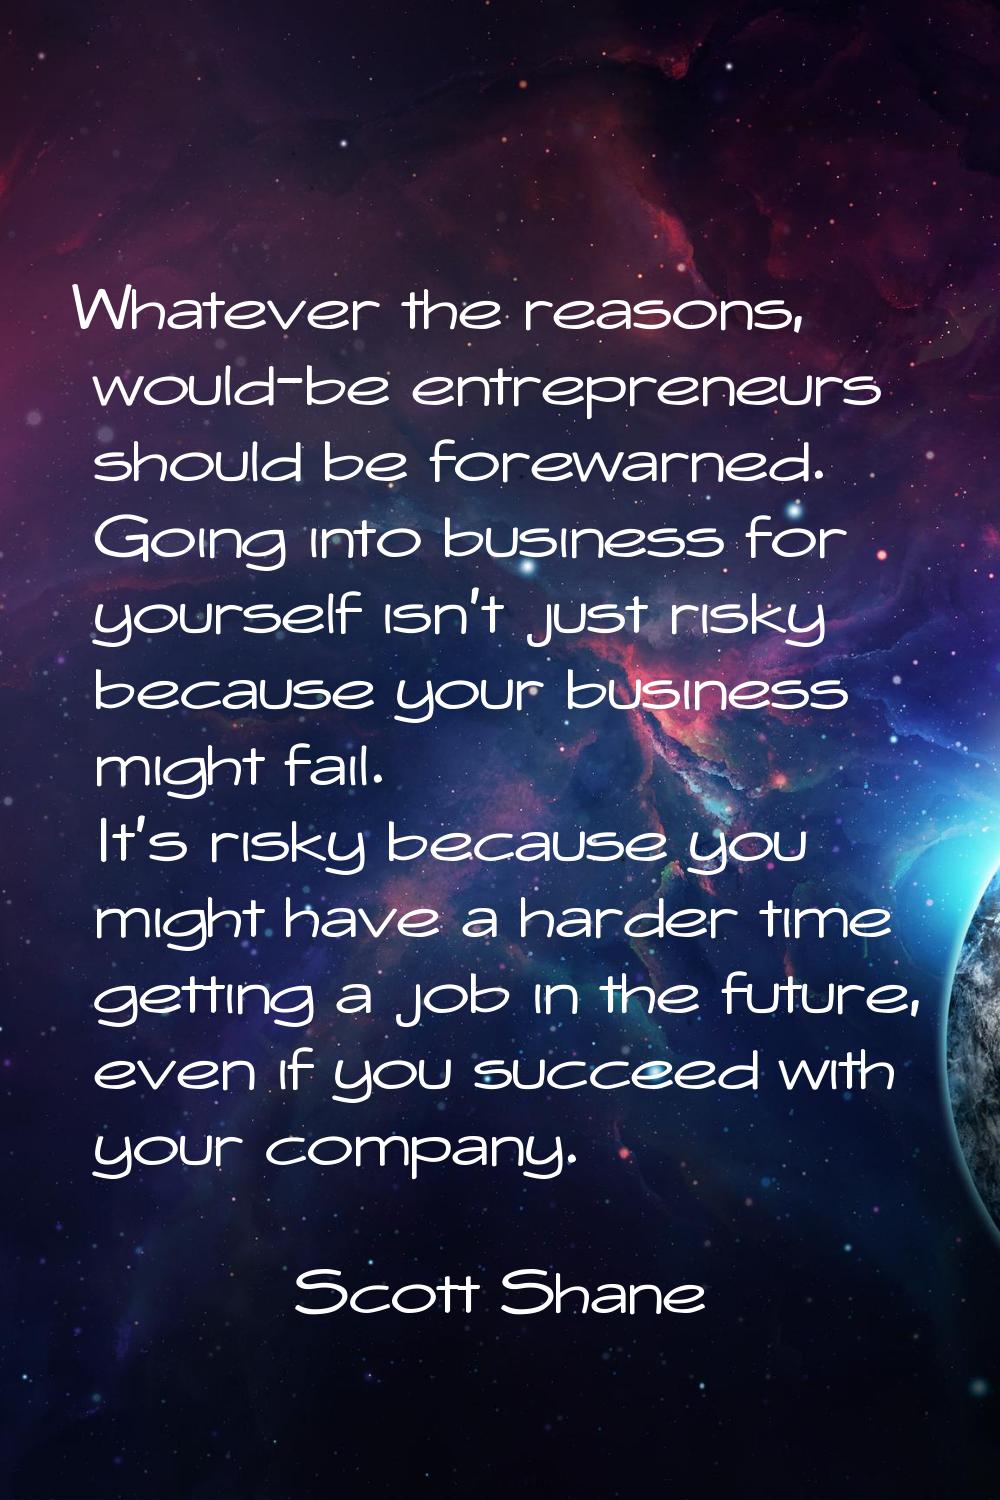 Whatever the reasons, would-be entrepreneurs should be forewarned. Going into business for yourself